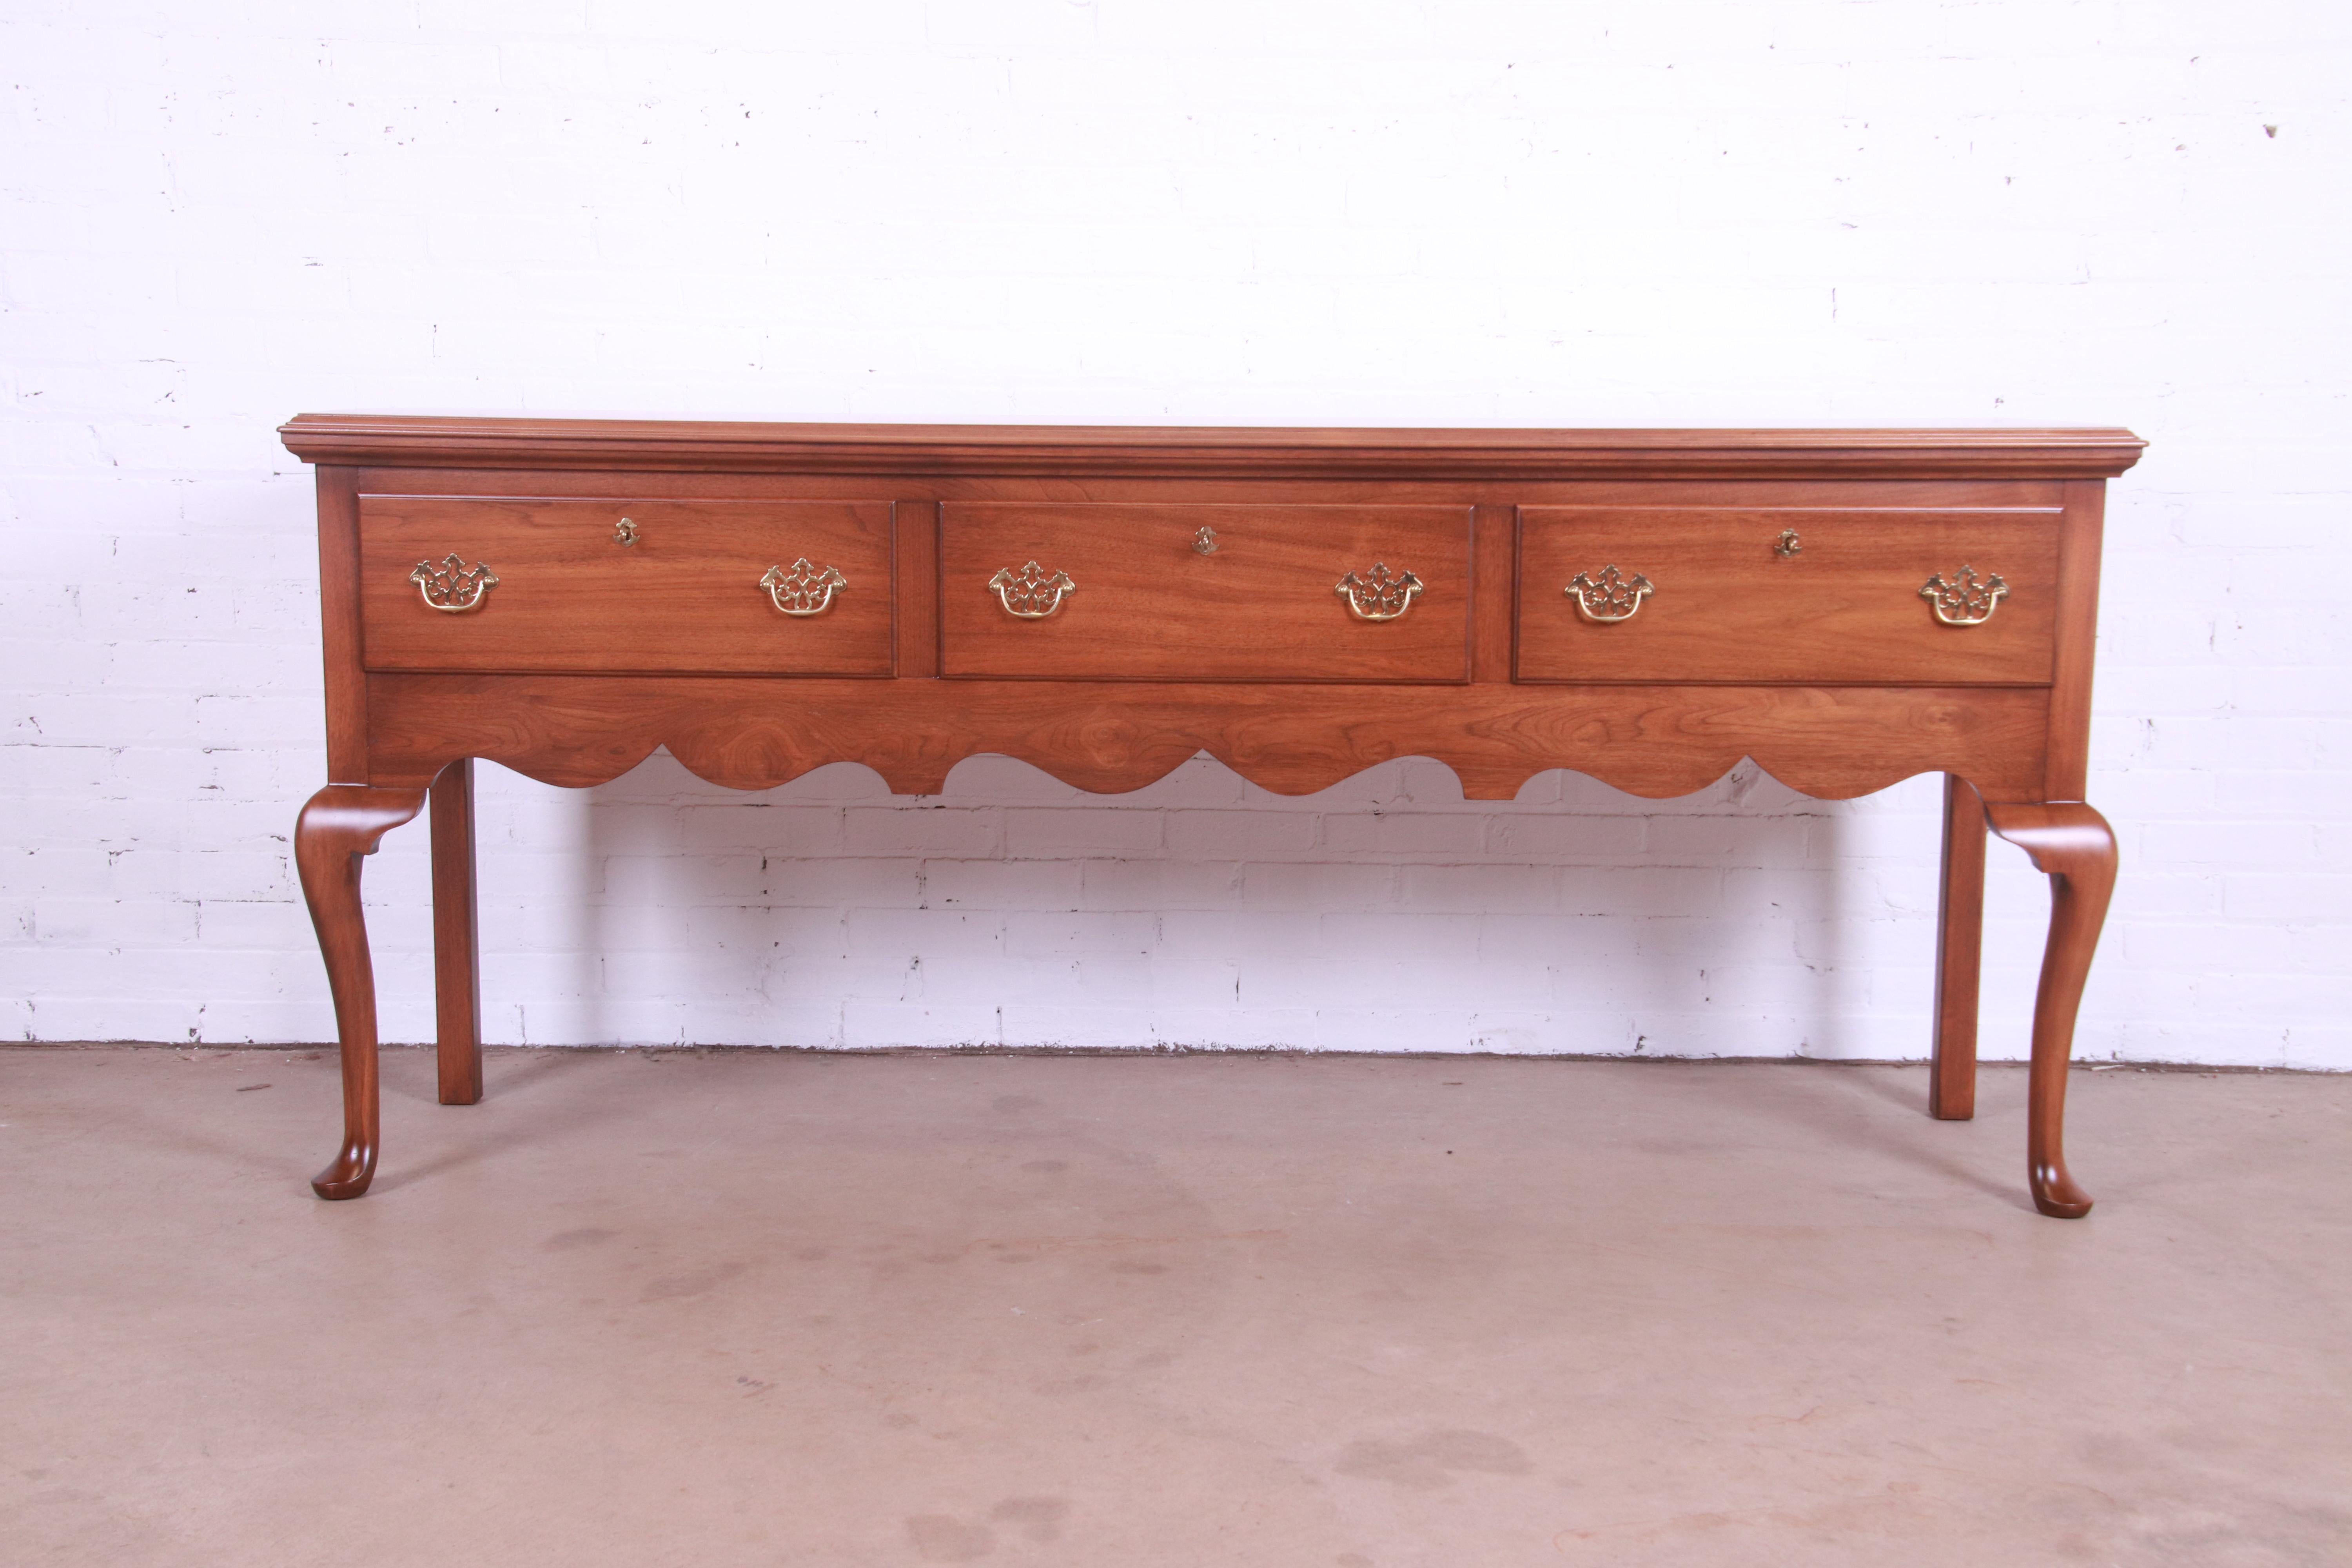 An exceptional Queen Anne style huntboard, buffet server, or console

By Henkel Harris, 